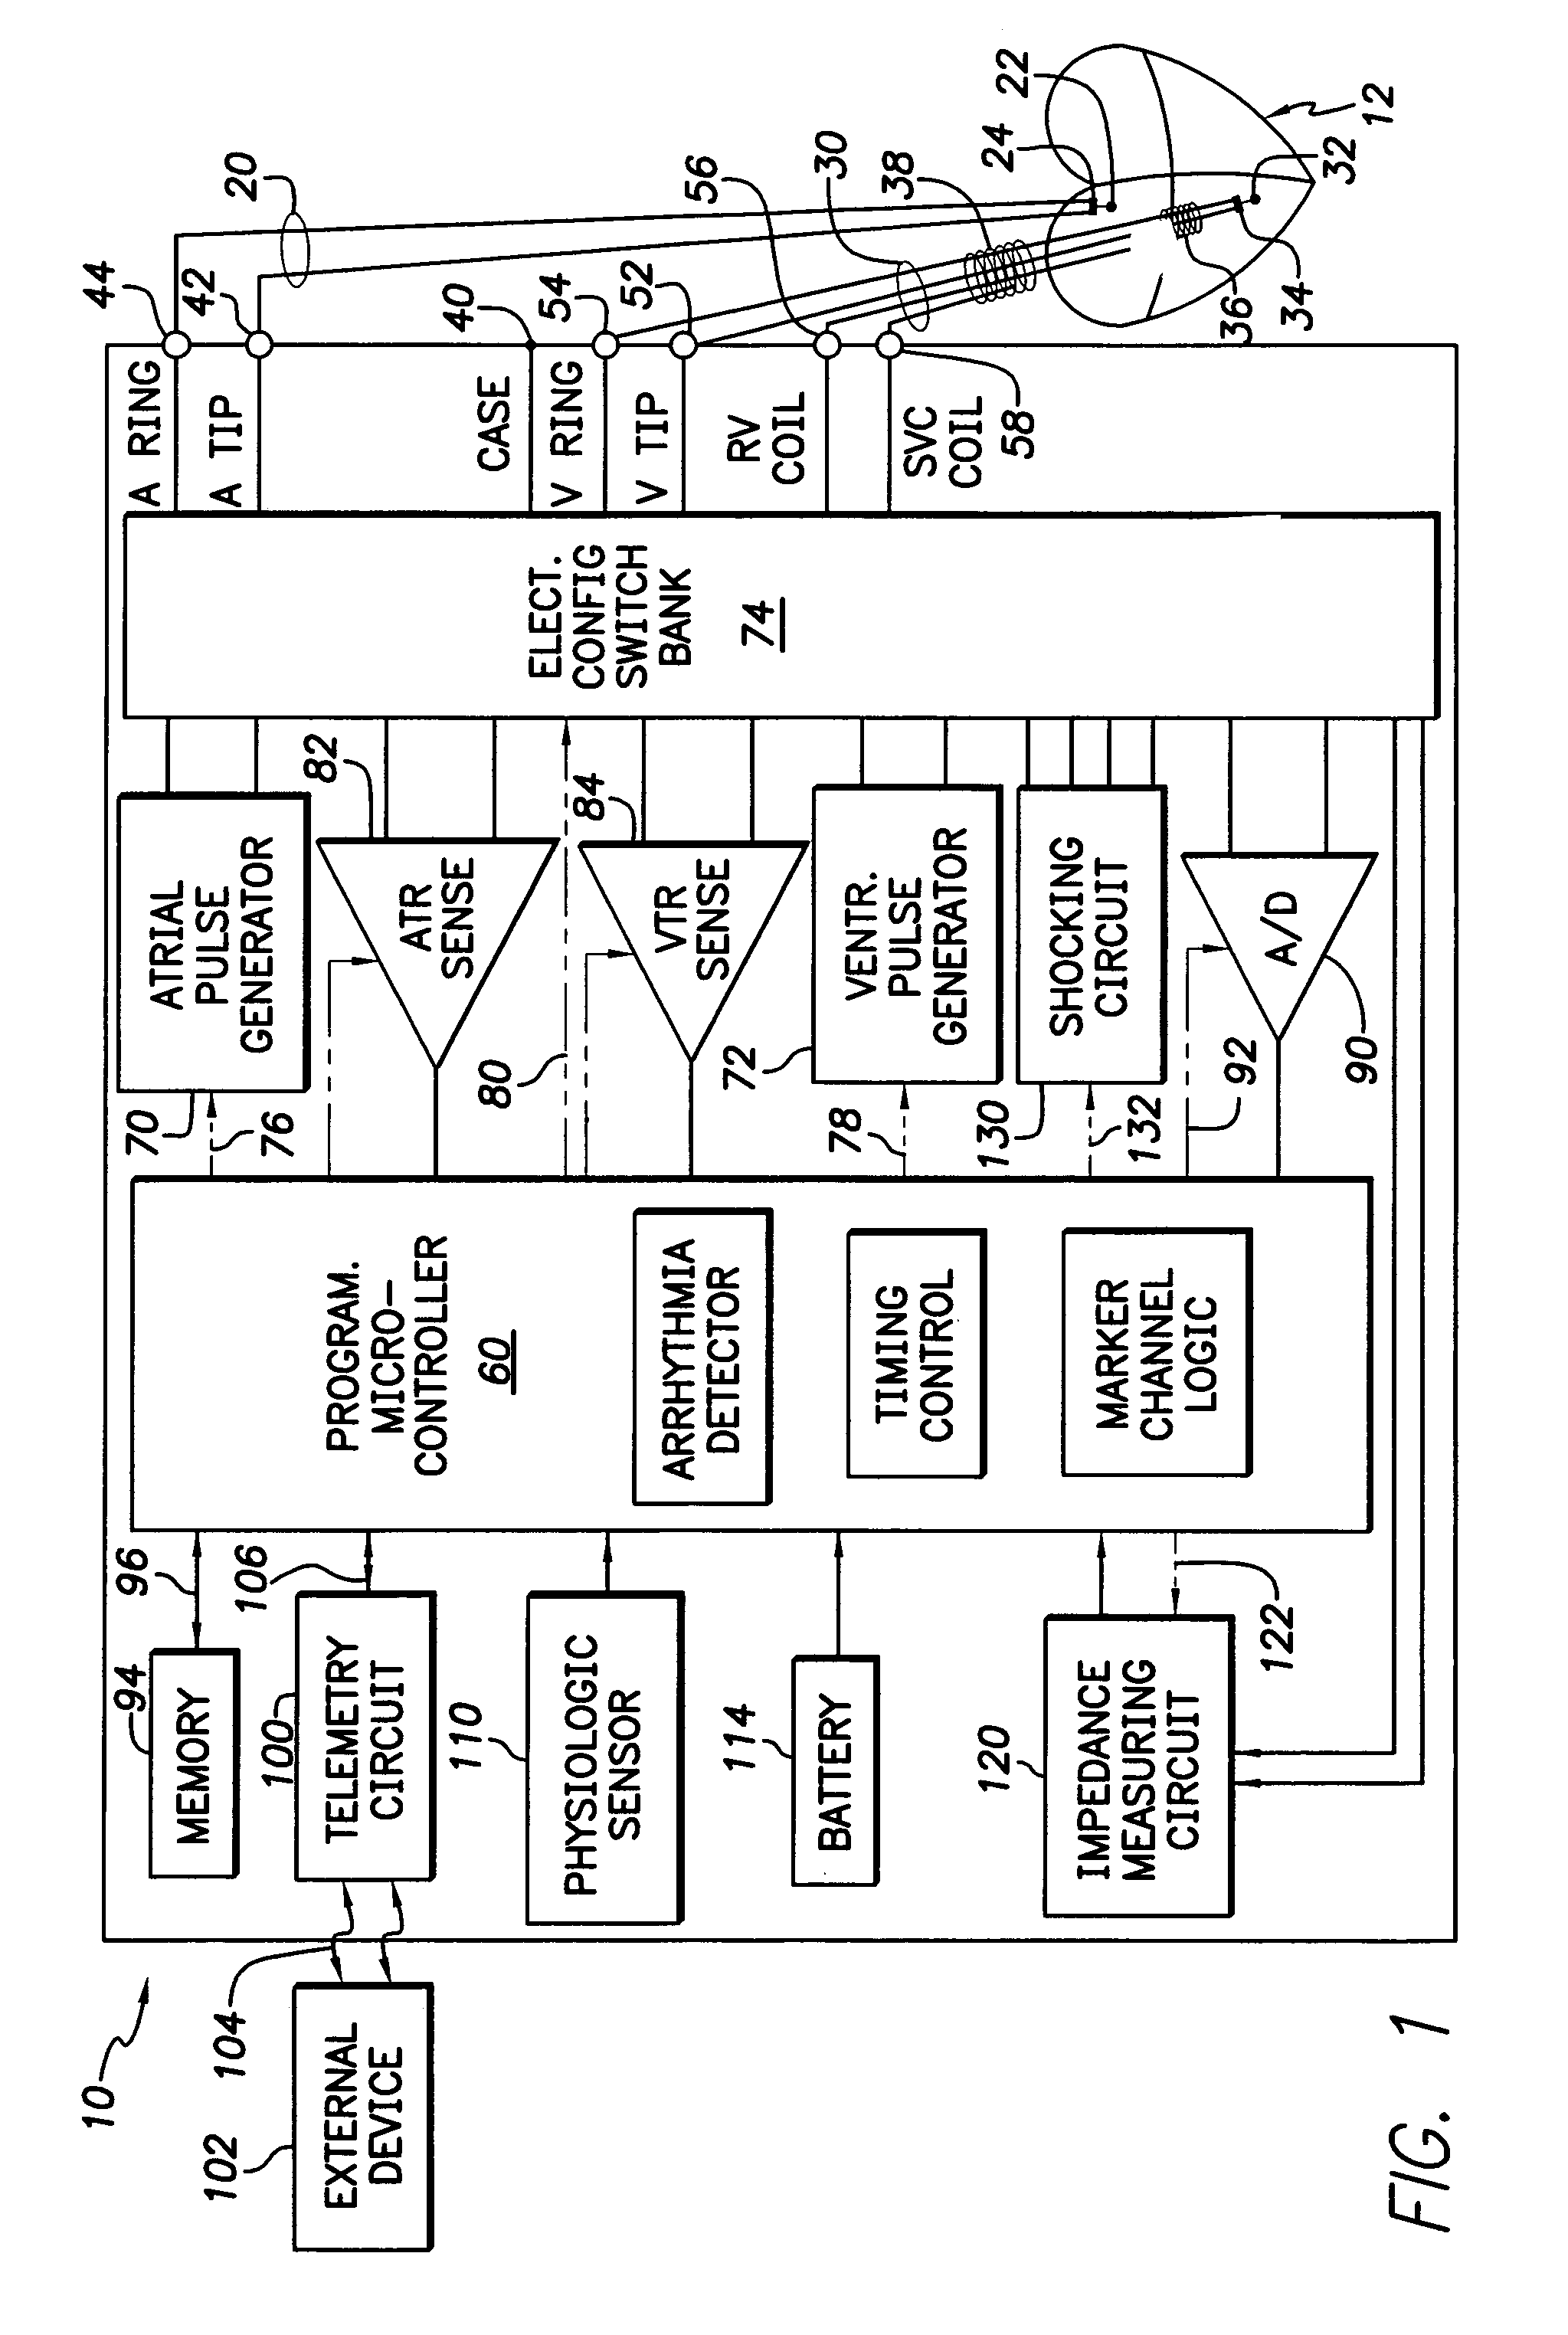 Implantable cardiac stimulation device including a system for and method of automatically inducing a tachyarrhythmia